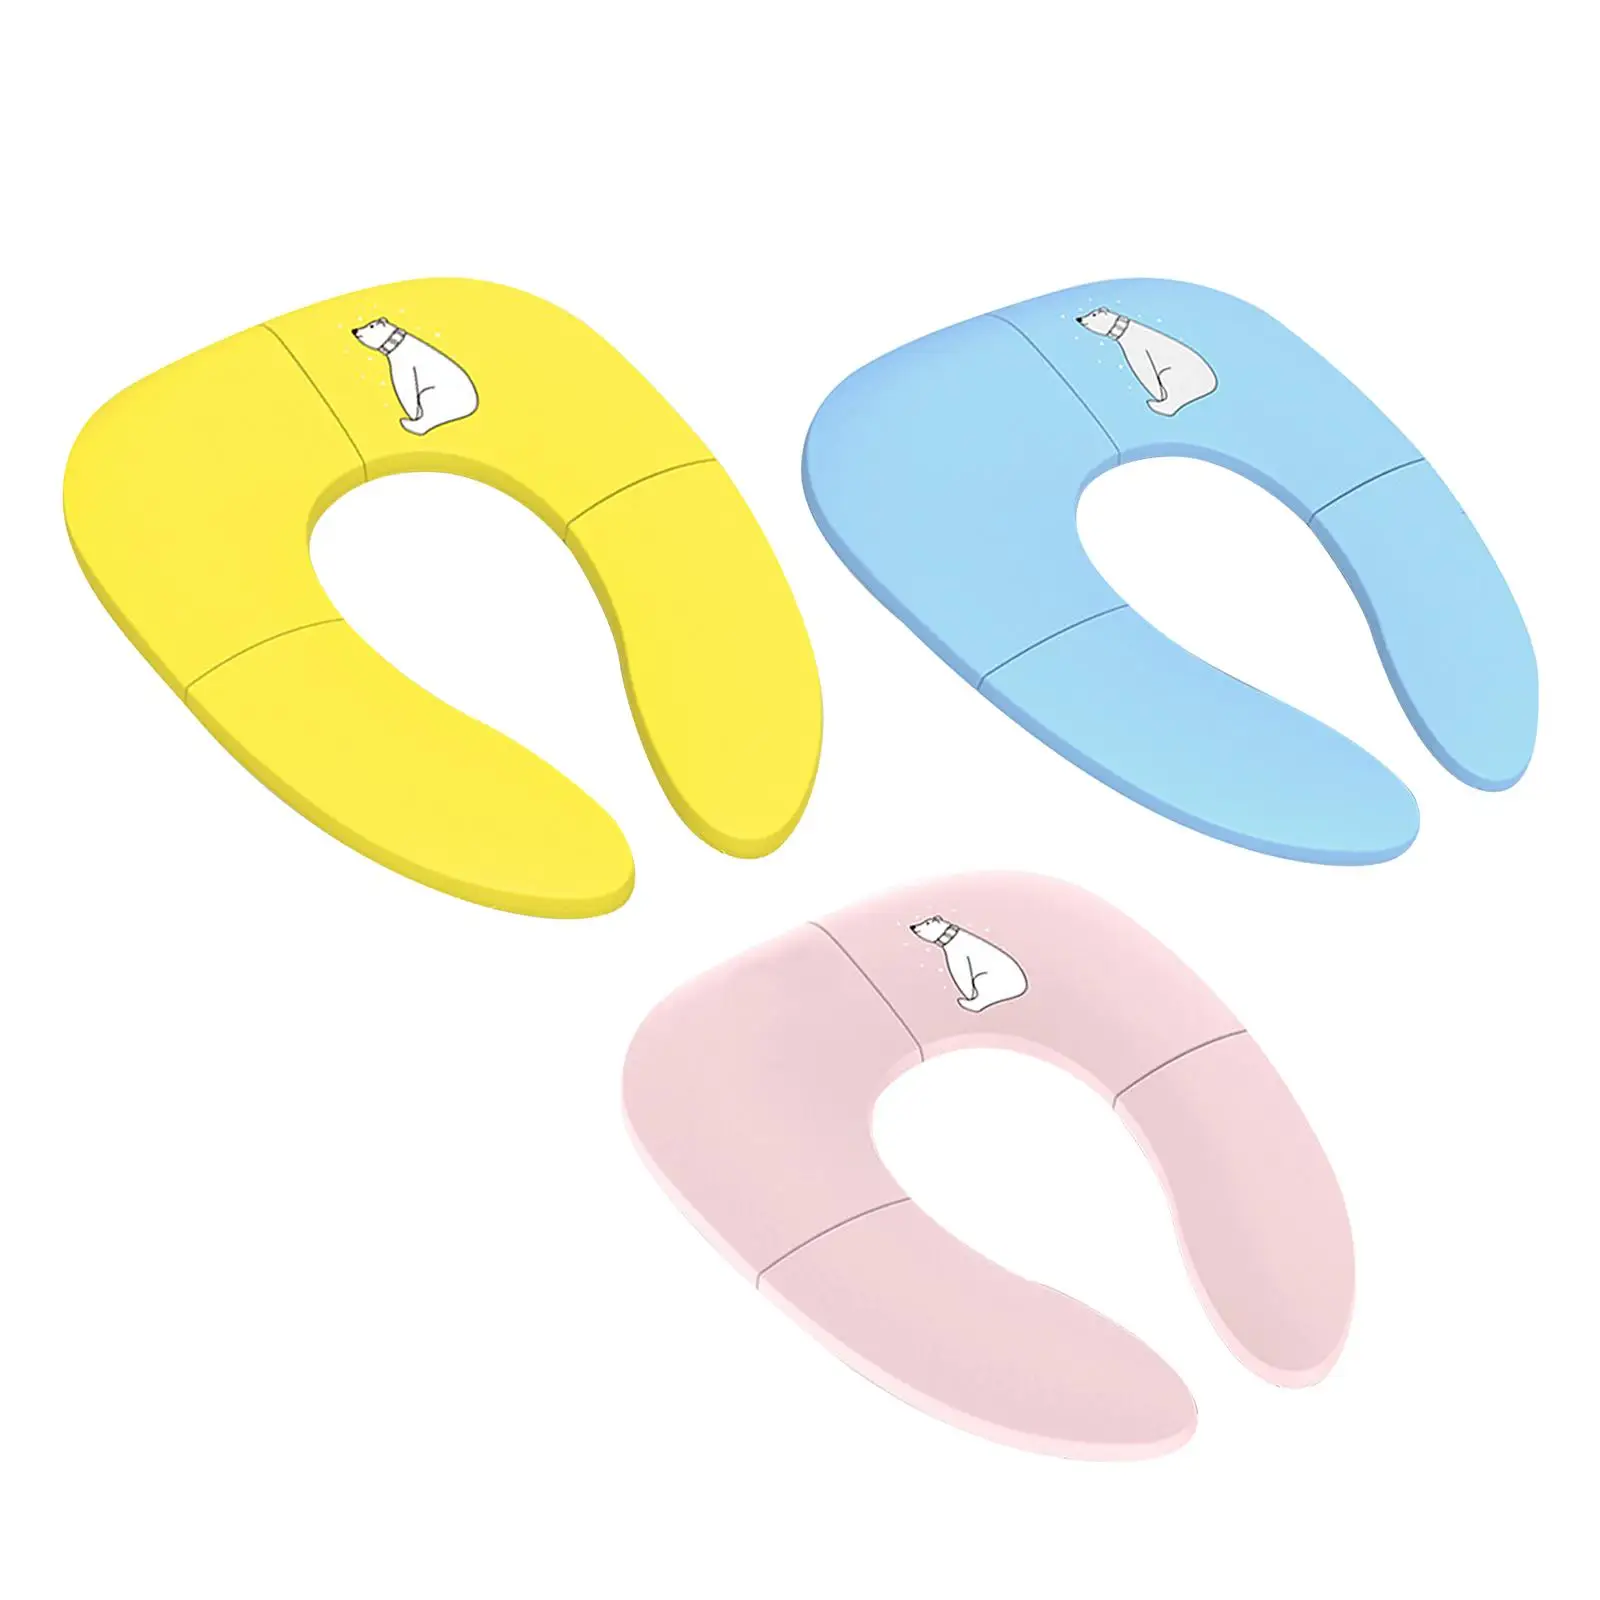 Folding Toilet pad Reusable Toilet Seat Toilet Ring Toilet Cushion for Round and Oval Toilets Kids Baby Toddler Child